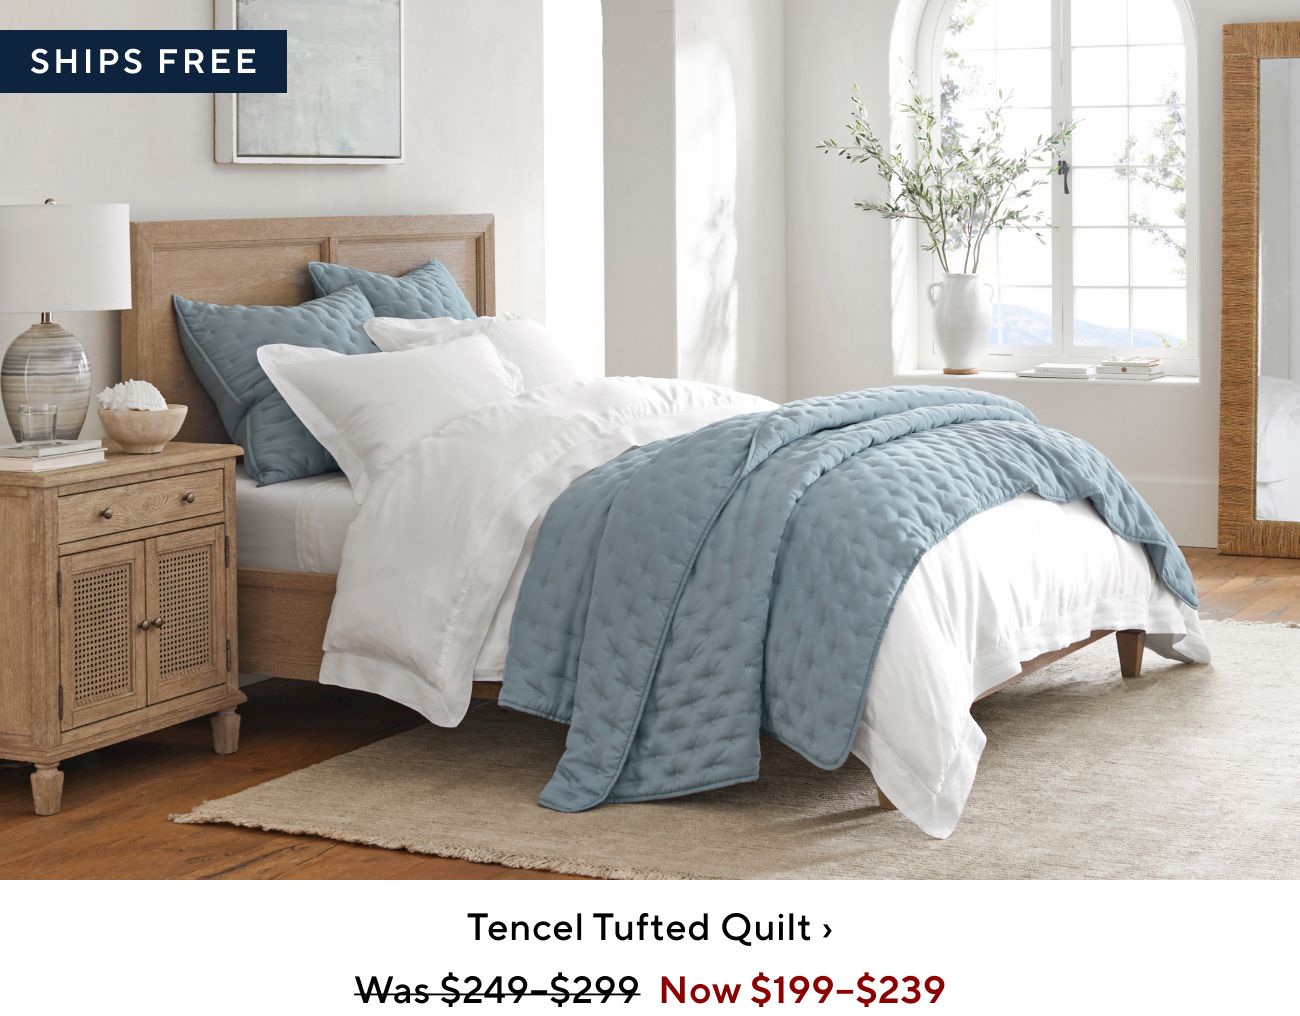  Tencel Tufted Quilt Was $249-$299 Now $199-$239 